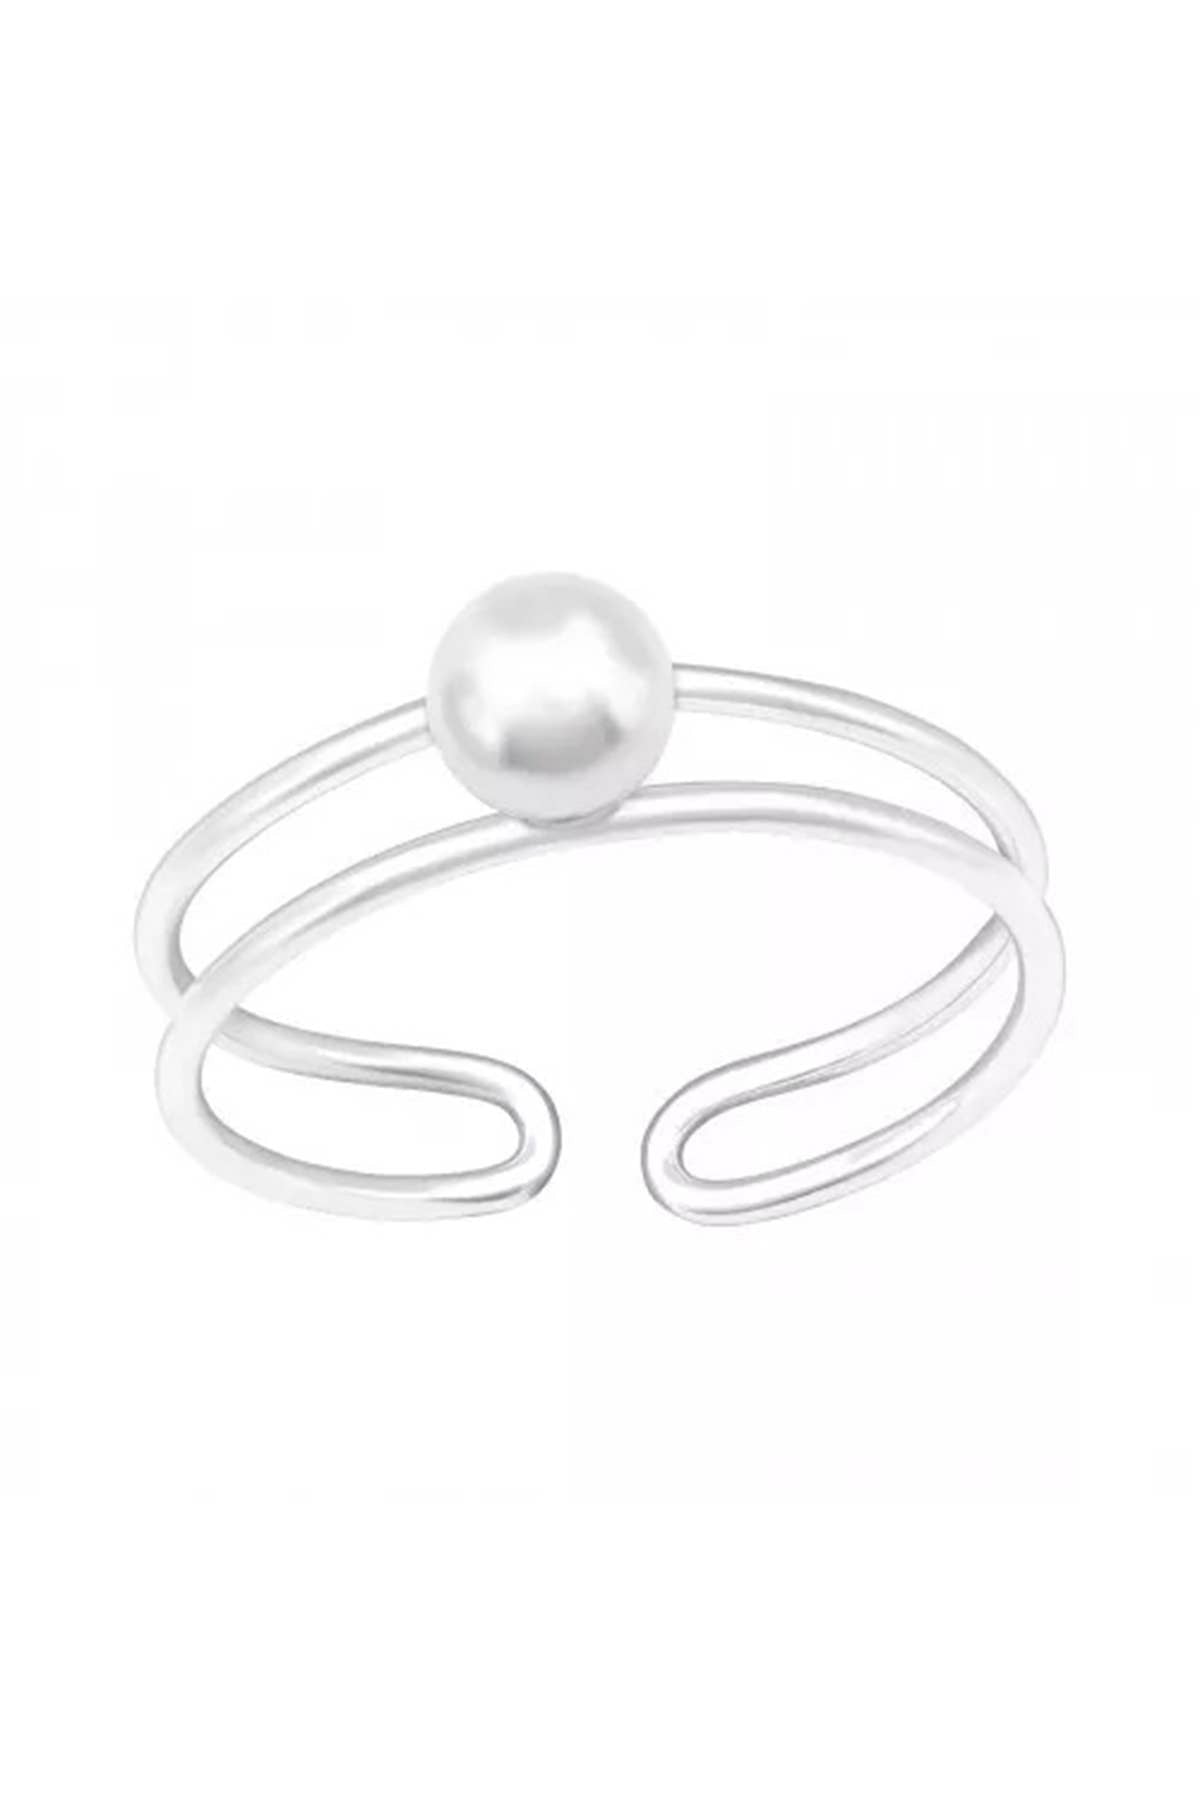 Sterling Silver Stackable Adjustable Toe Ring & Pearl - SS